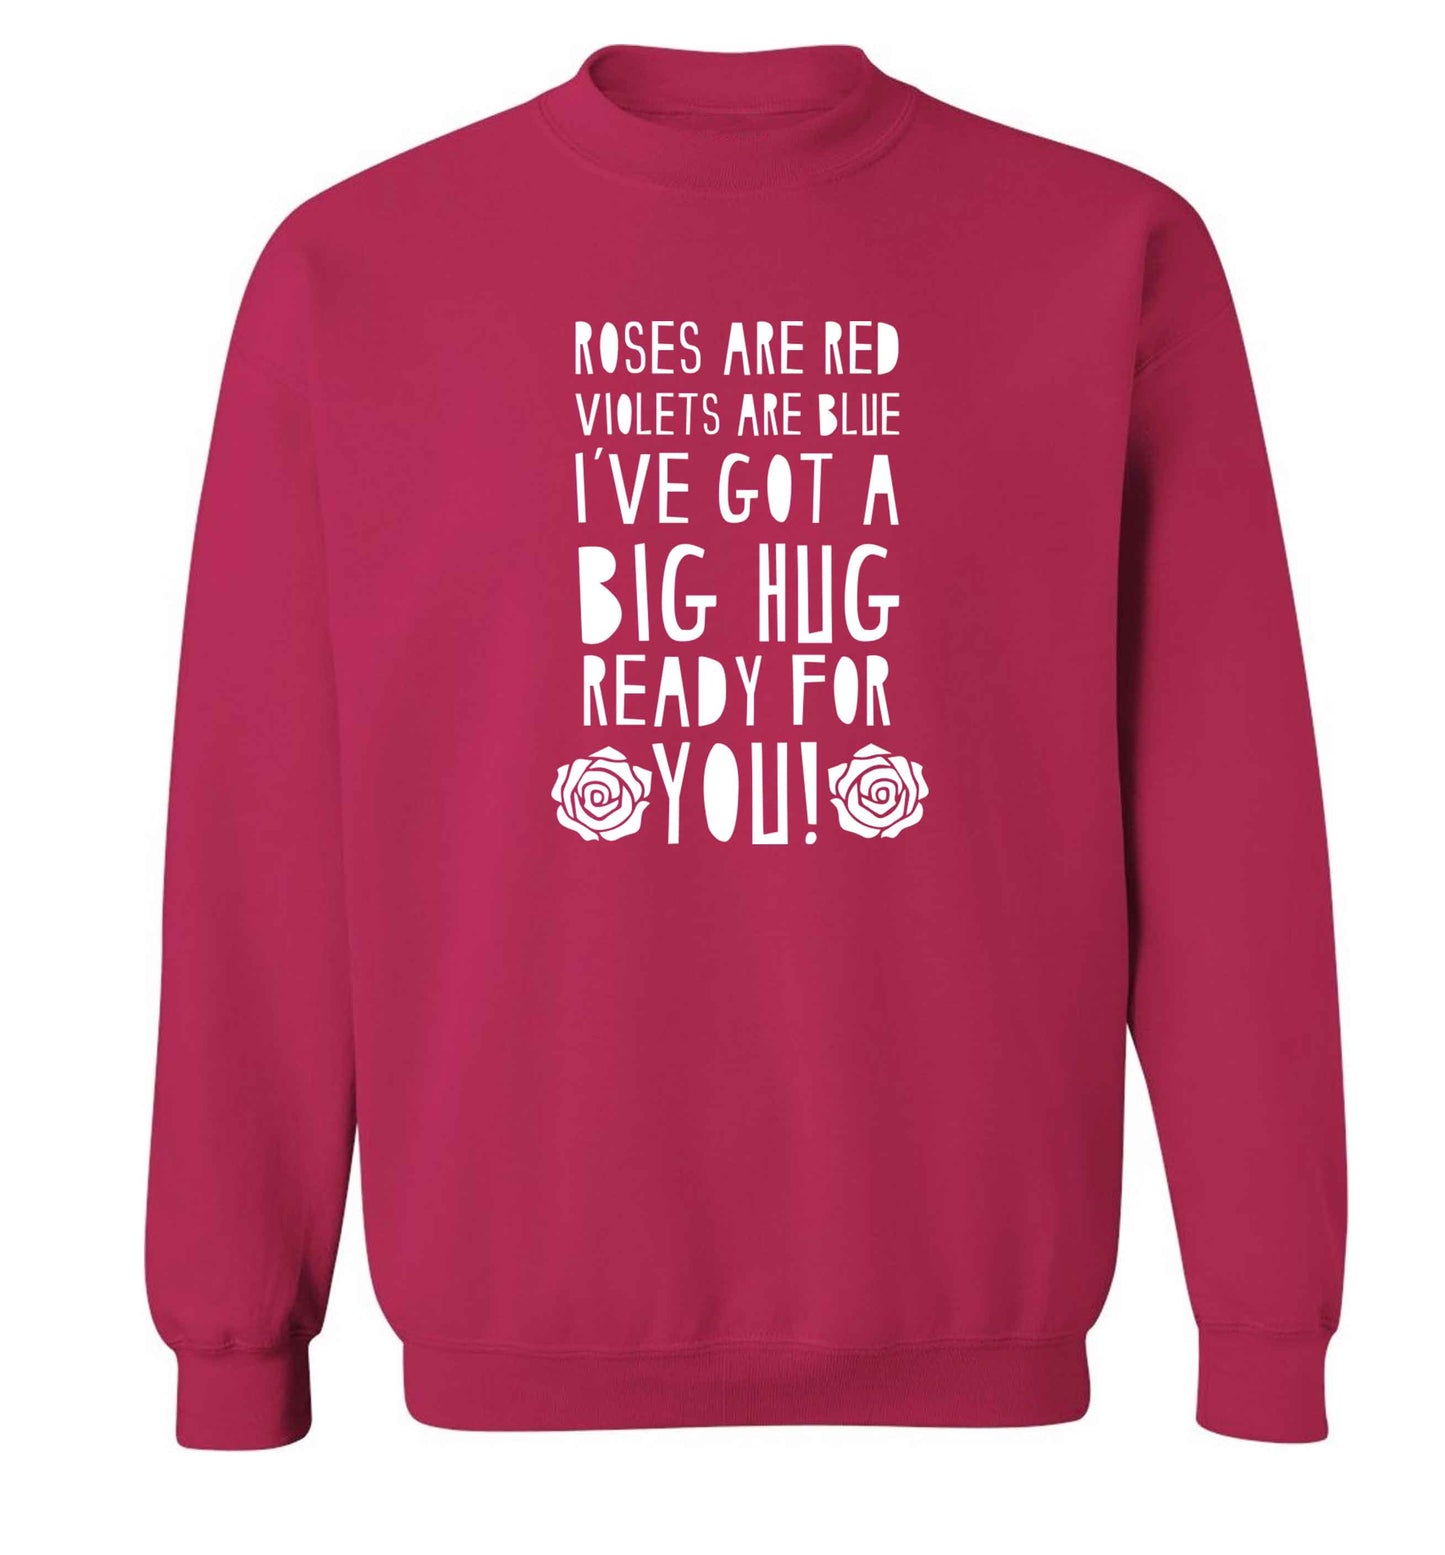 Roses are red violets are blue I've got a big hug coming for you adult's unisex pink sweater 2XL